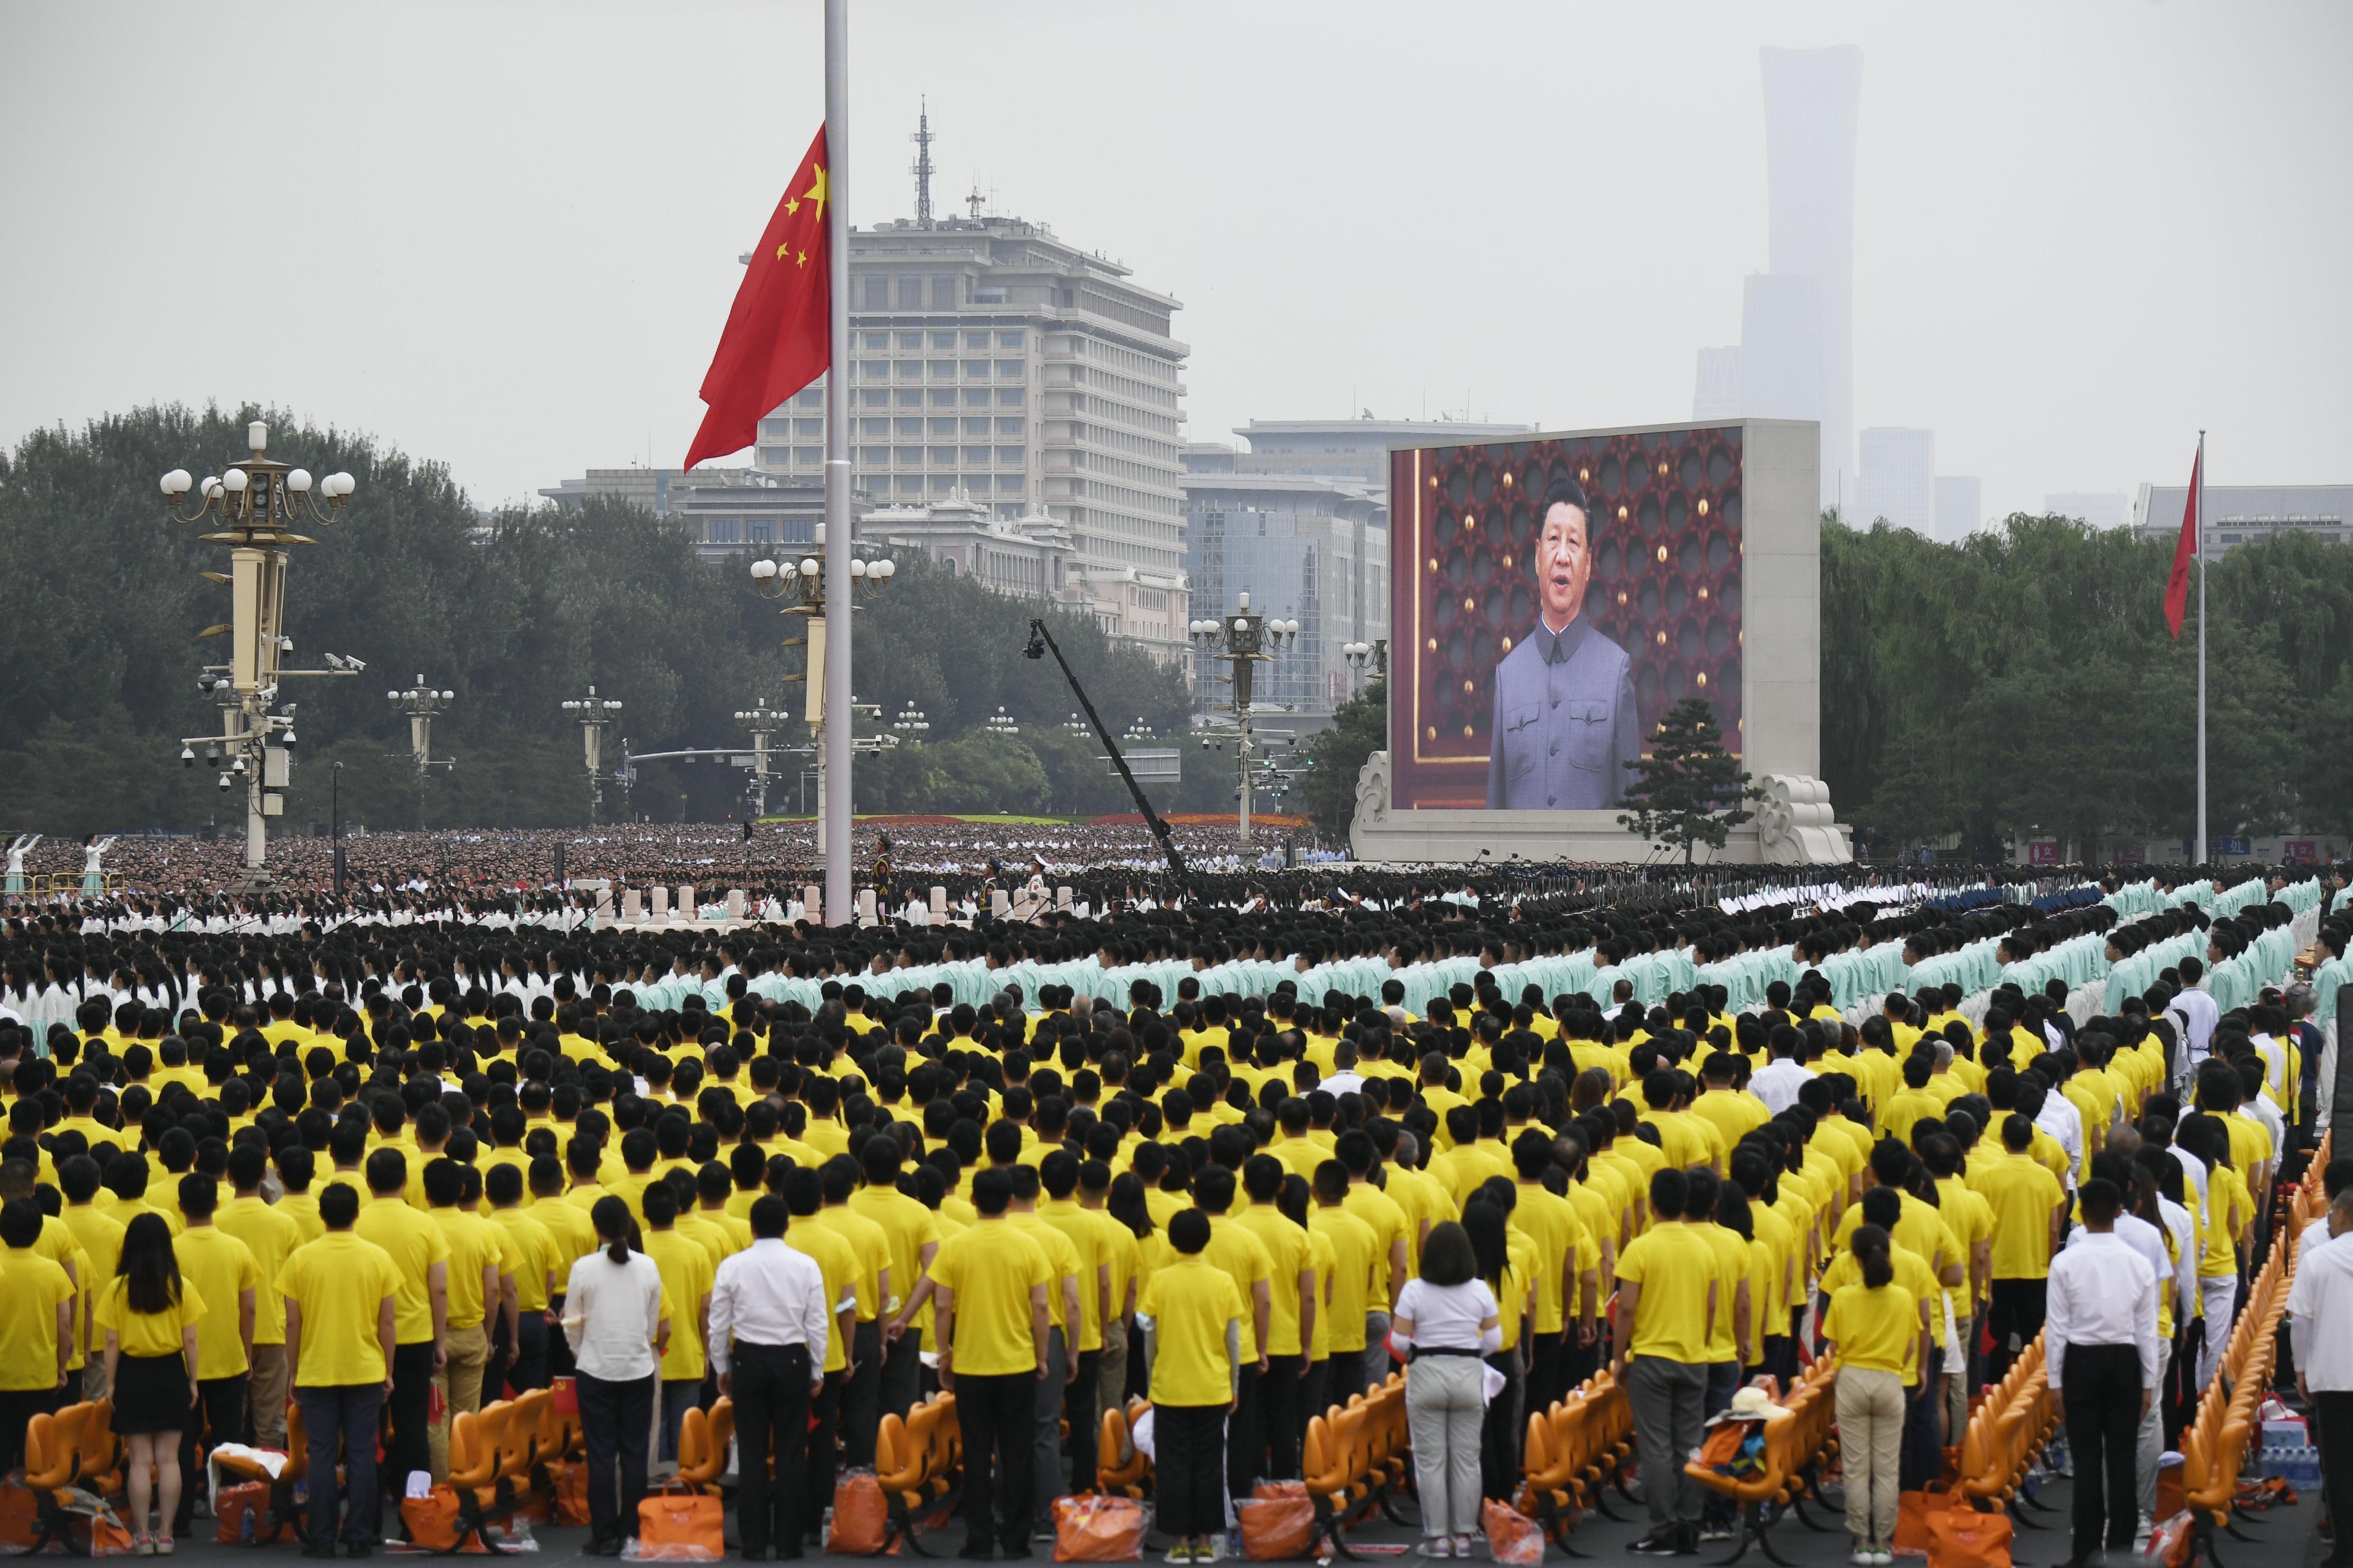 President Xi Jinping is seen on the big screen during an event to celebrate the 100th anniversary of the founding of the Communist Party.